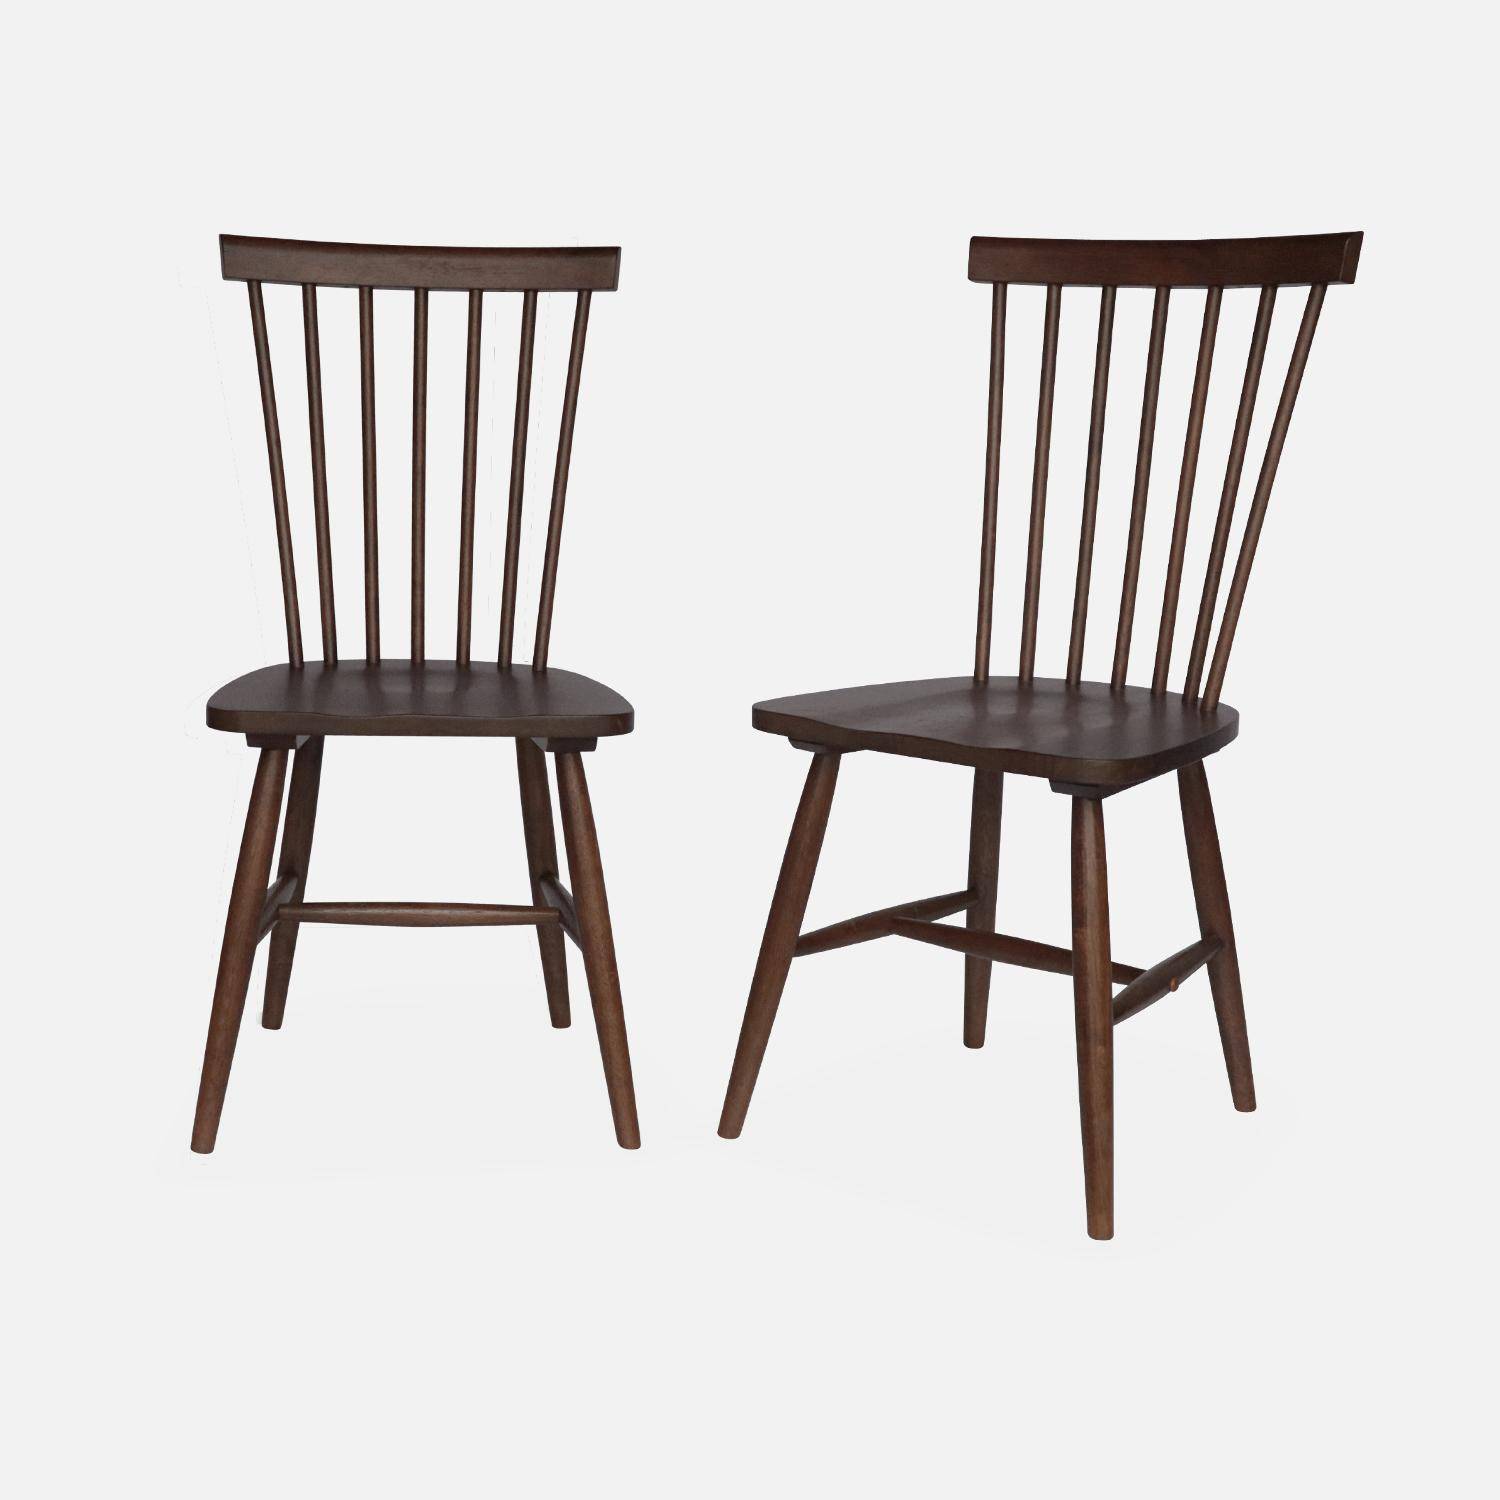 Pair of dining room chairs in Hevea wood,  L49 x W44 x H90 cm, Dark wood Photo4